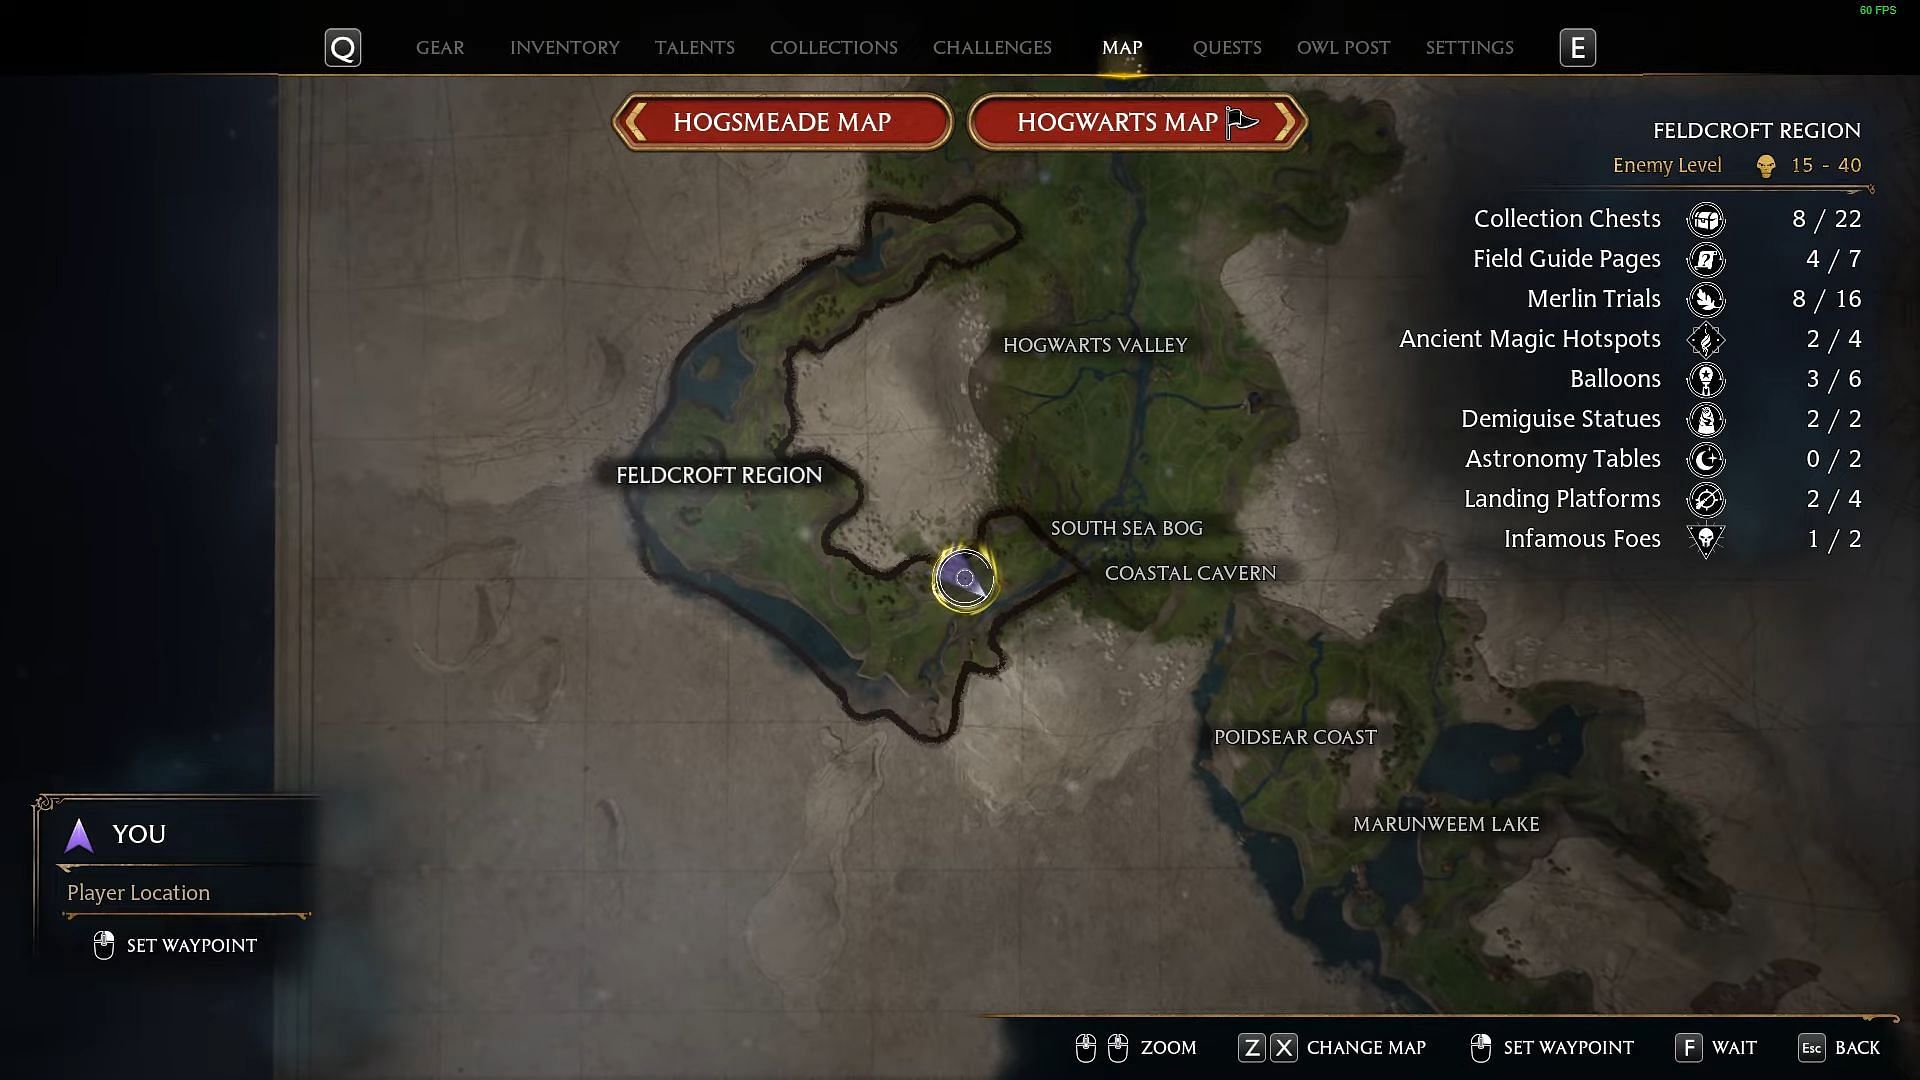 The Jobberknoll den locations in the in-game map (Image via YouTube/Gaming Tornedo)